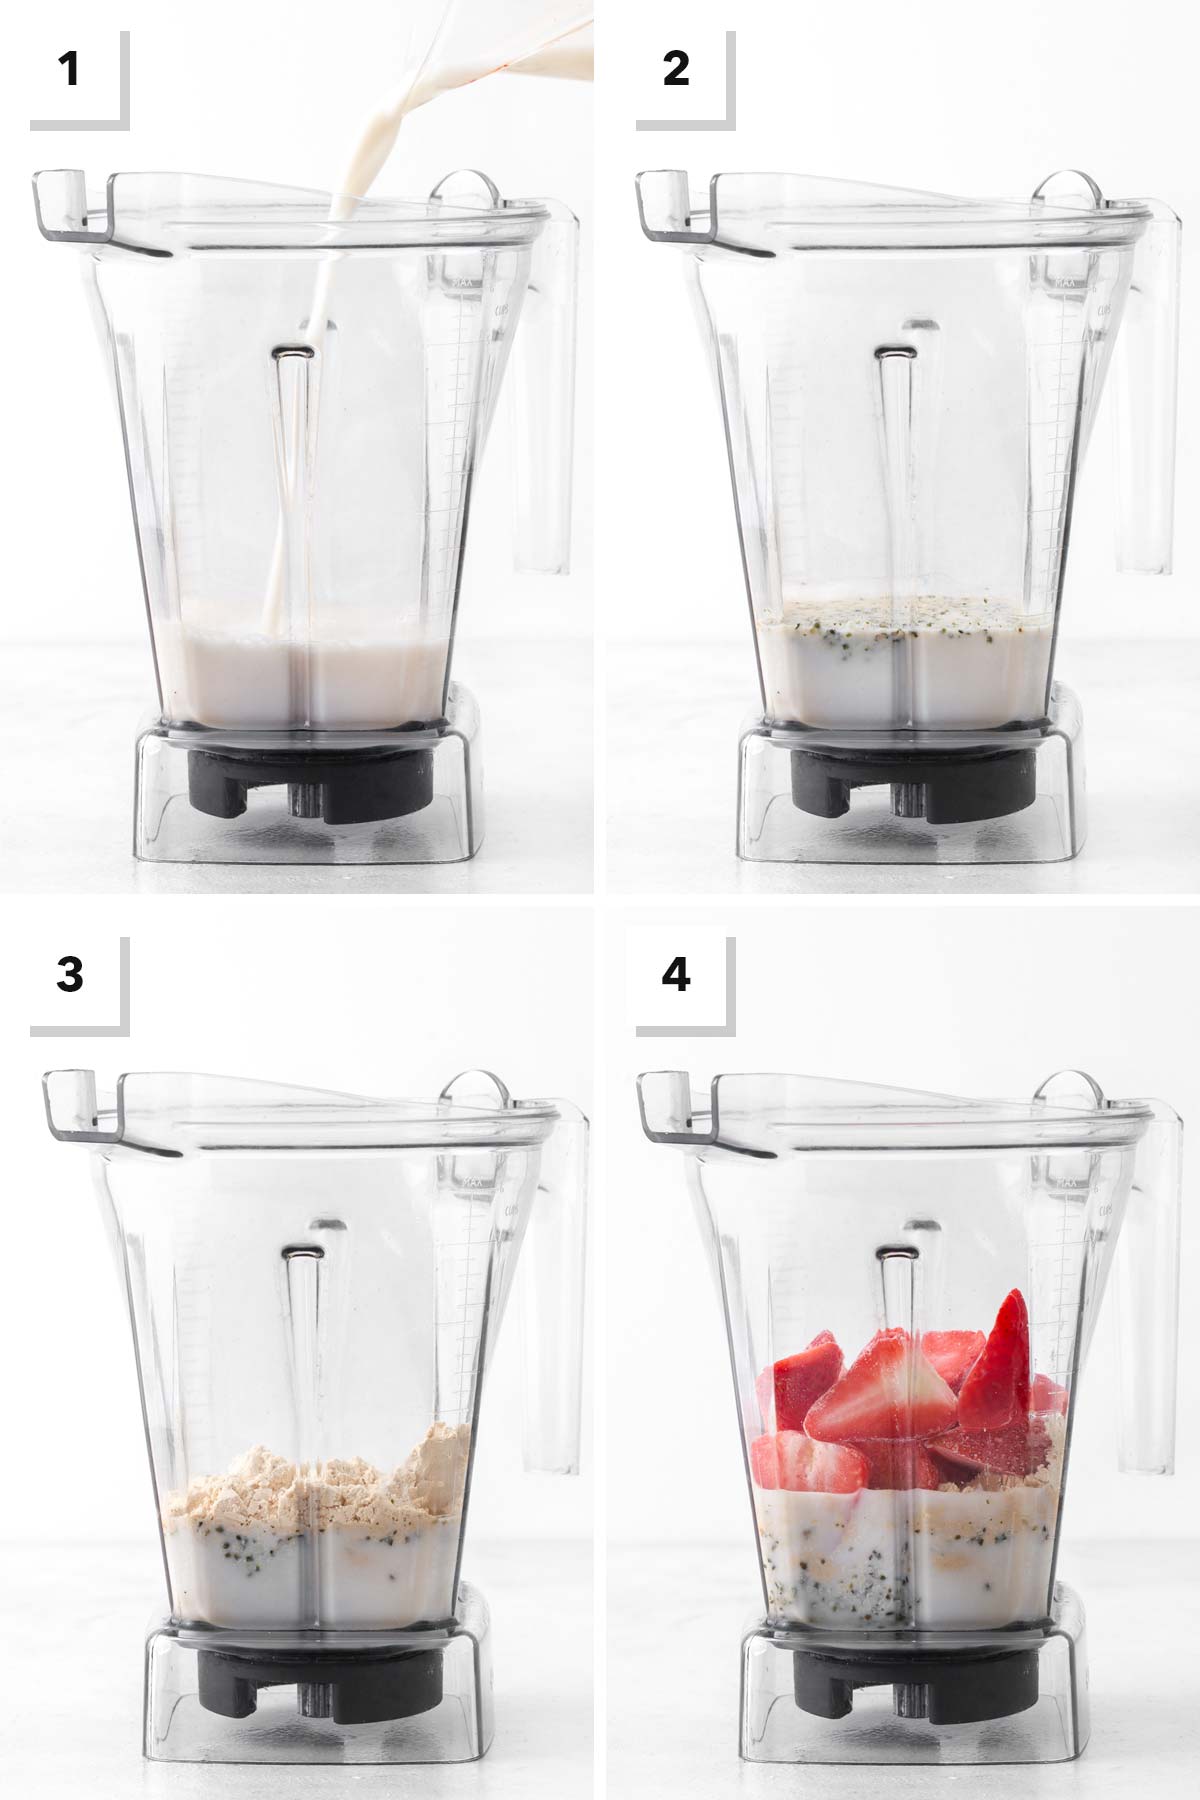 Steps for making a strawberry protein smoothie.